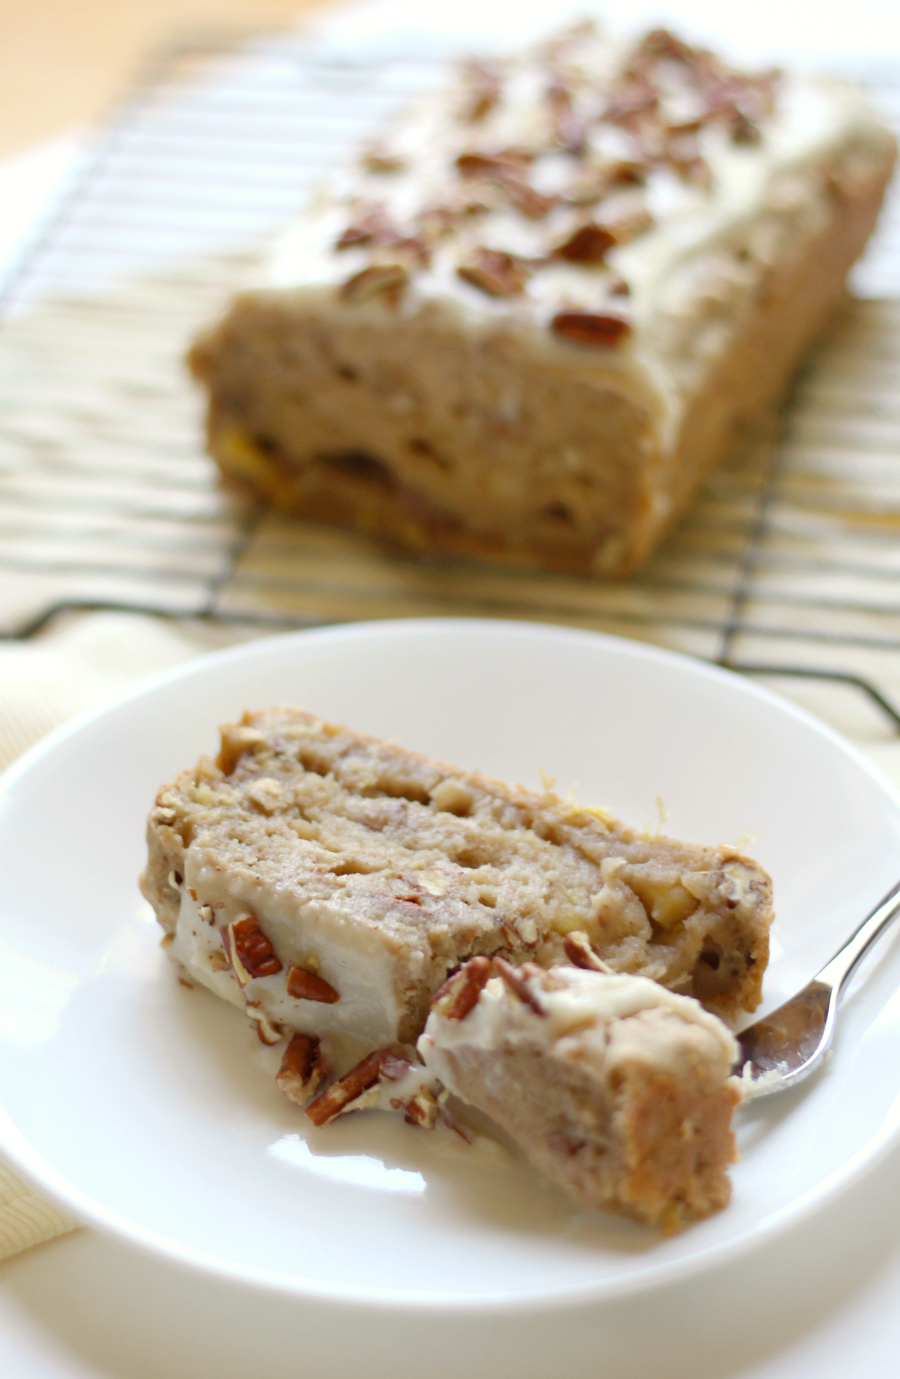 Gluten-Free Hummingbird Loaf Cake (Vegan) | Strength and Sunshine @RebeccaGF666 The sweet and nutty classic Southern dessert now with a gluten-free and vegan recipe! Gluten-Free Hummingbird Loaf Cake topped with a delicious dairy-free cream cheese frosting and packed with pecans, banana, and pineapple!